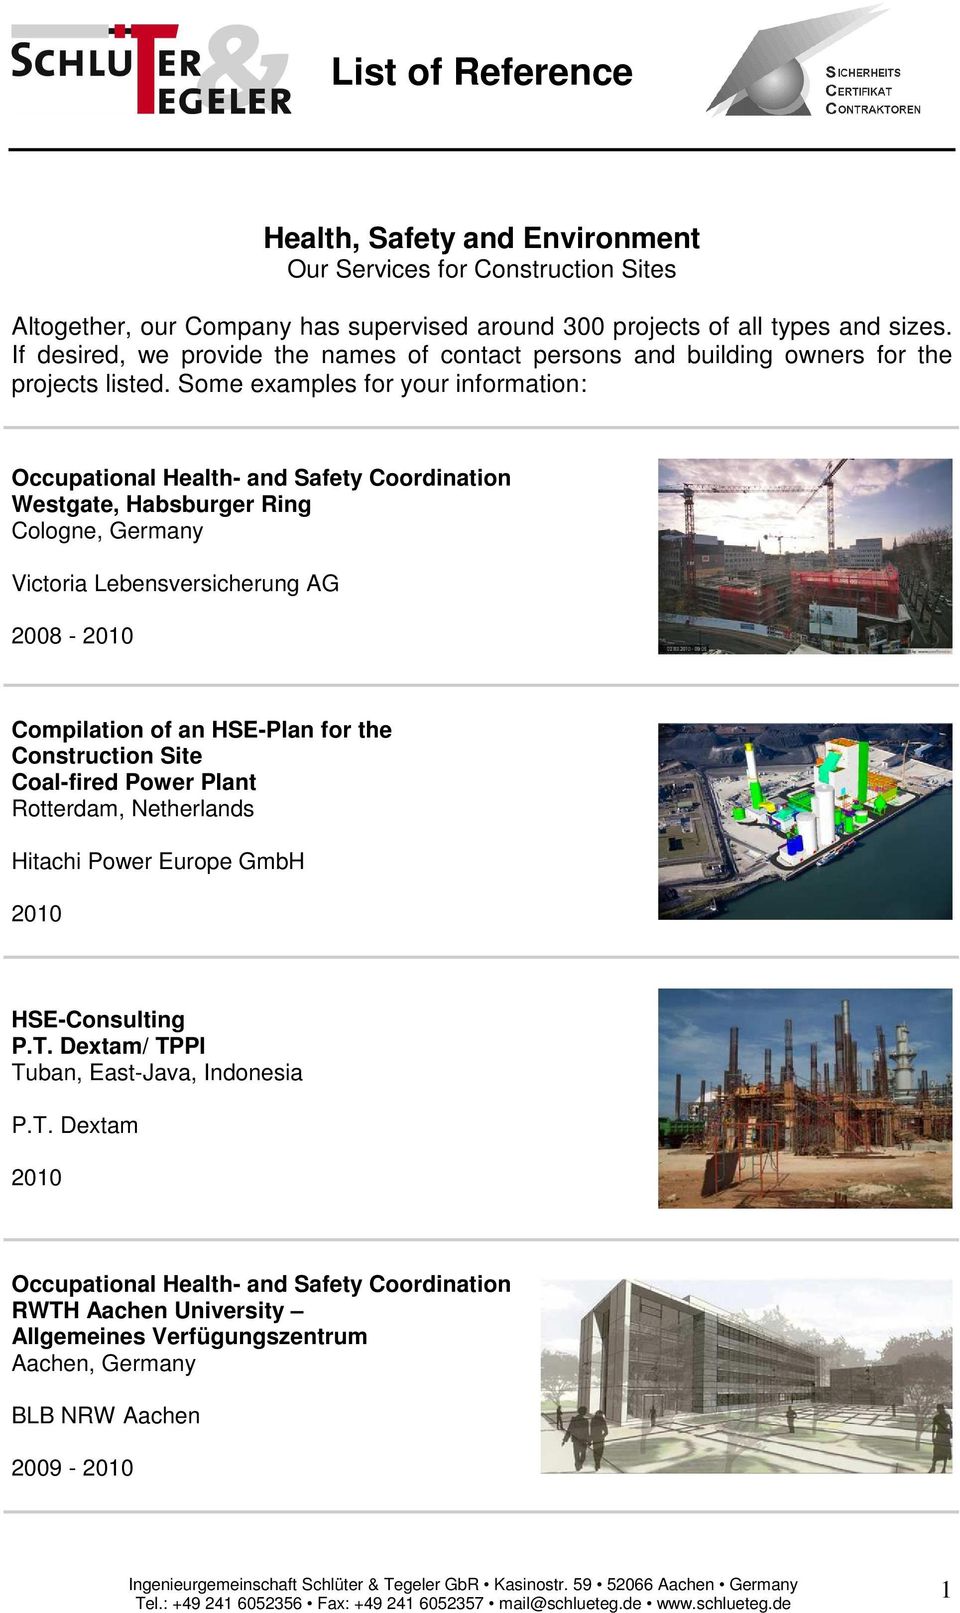 Some examples for your information: Westgate, Habsburger Ring Cologne, Victoria Lebensversicherung AG 2008-2010 Compilation of an HSE-Plan for the Construction